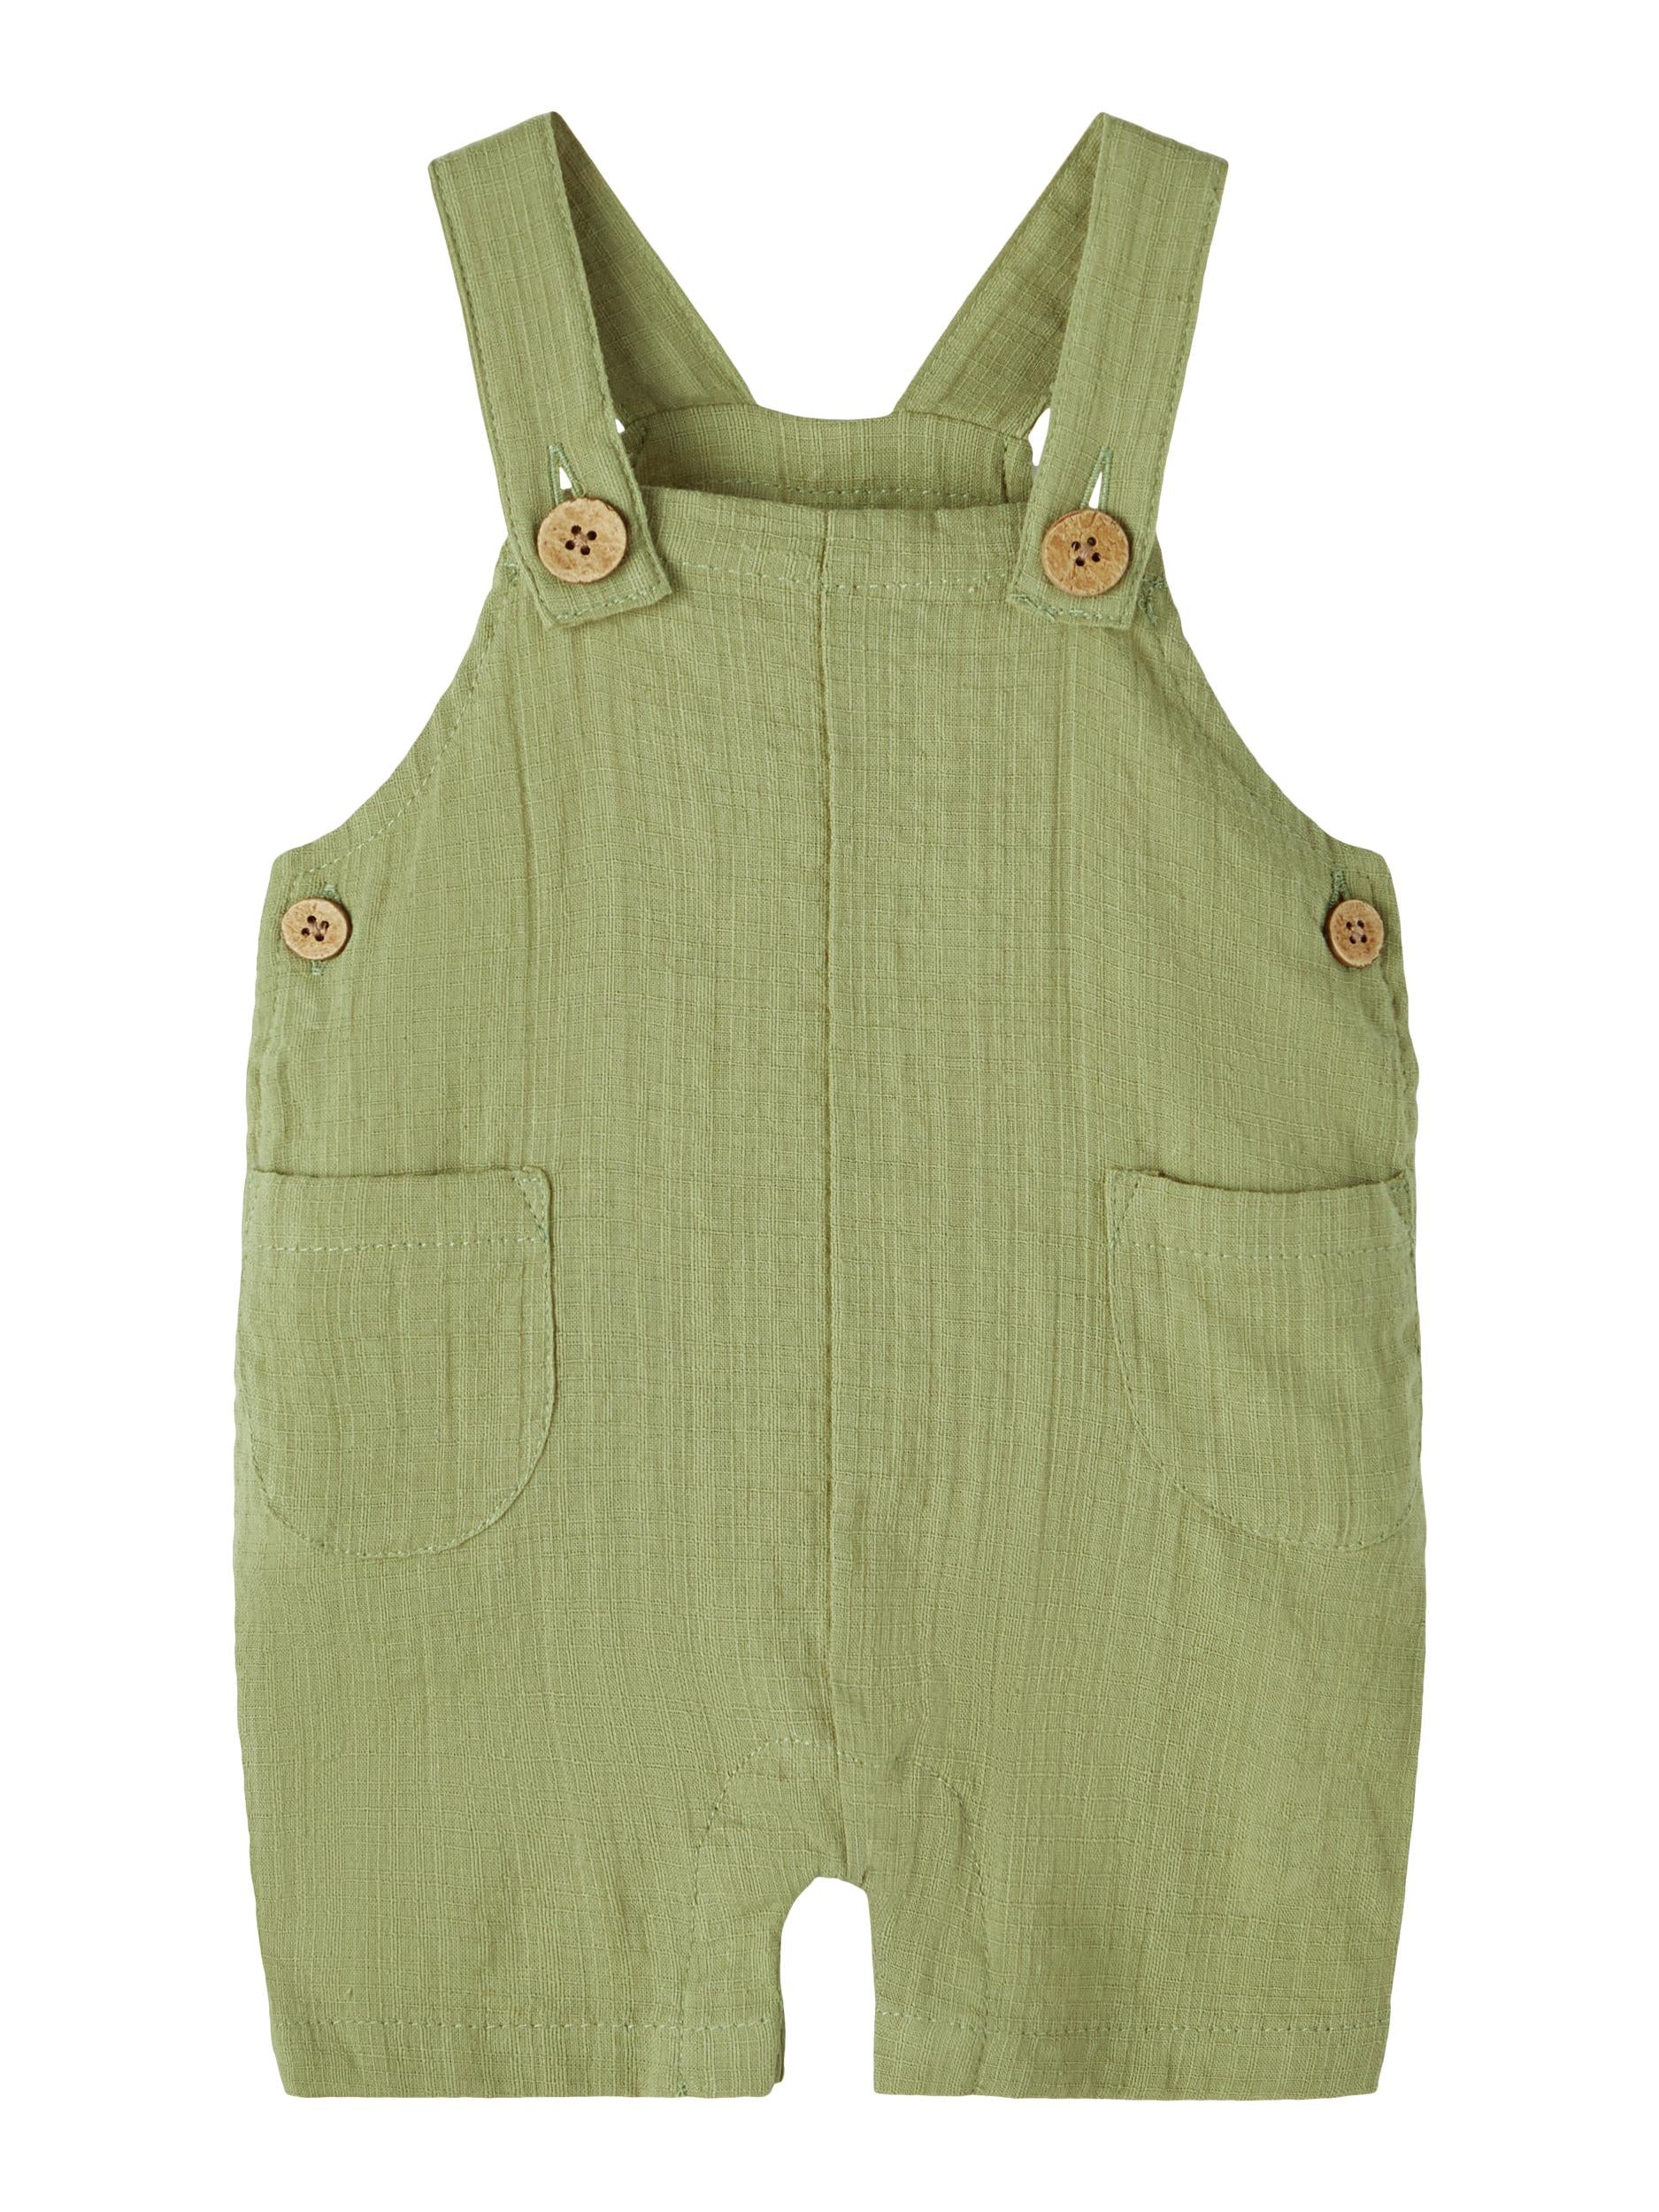 Lil Atelier Hessa Loose Overall Shorts - Sage